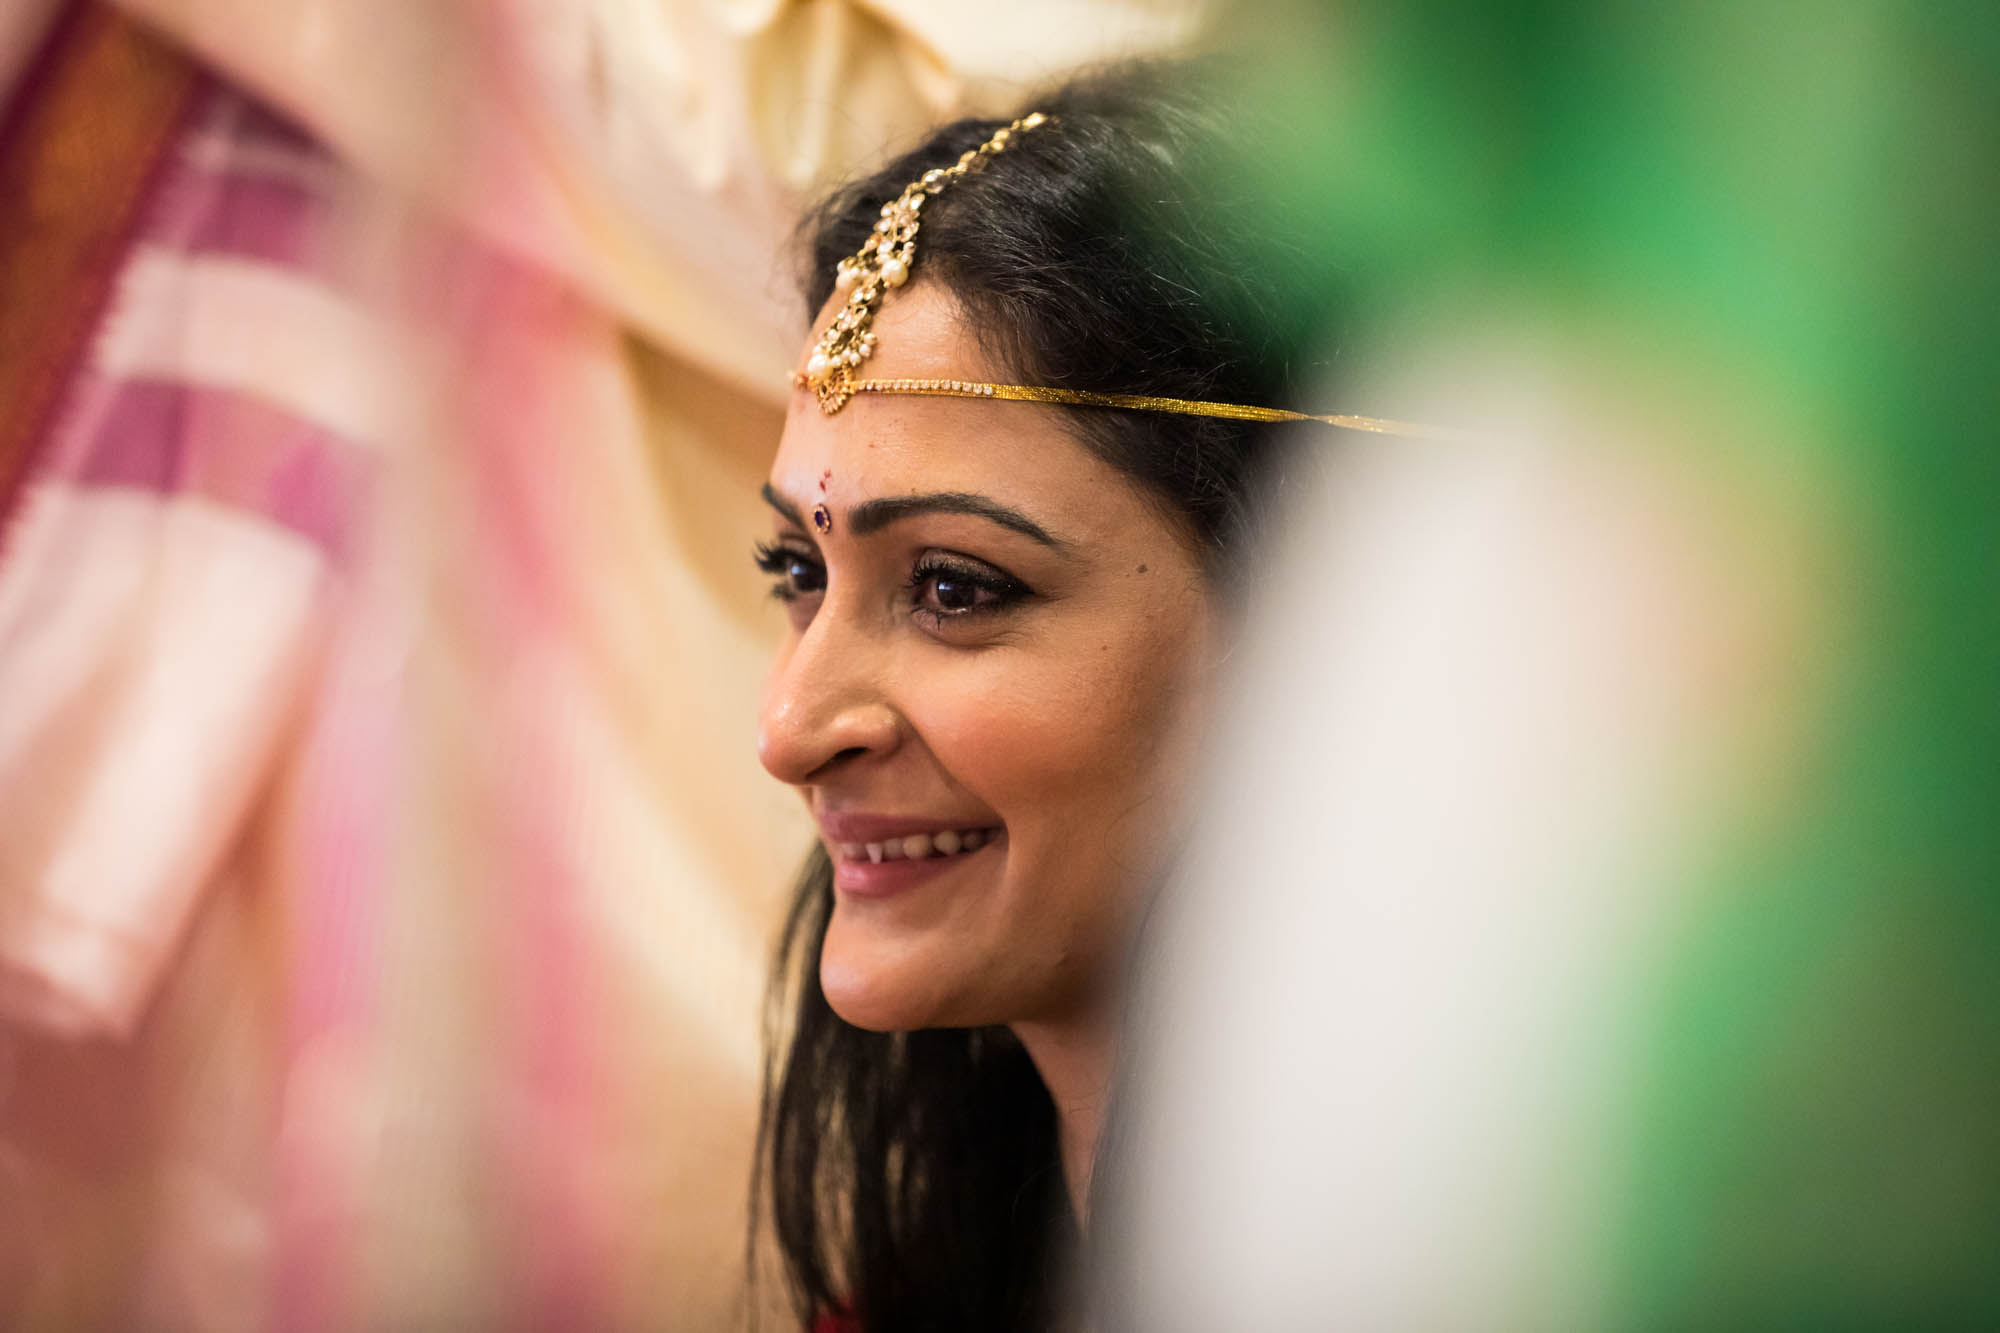 Smiling bride with gold jewelry on her head at a Hindu Temple Society of North America wedding